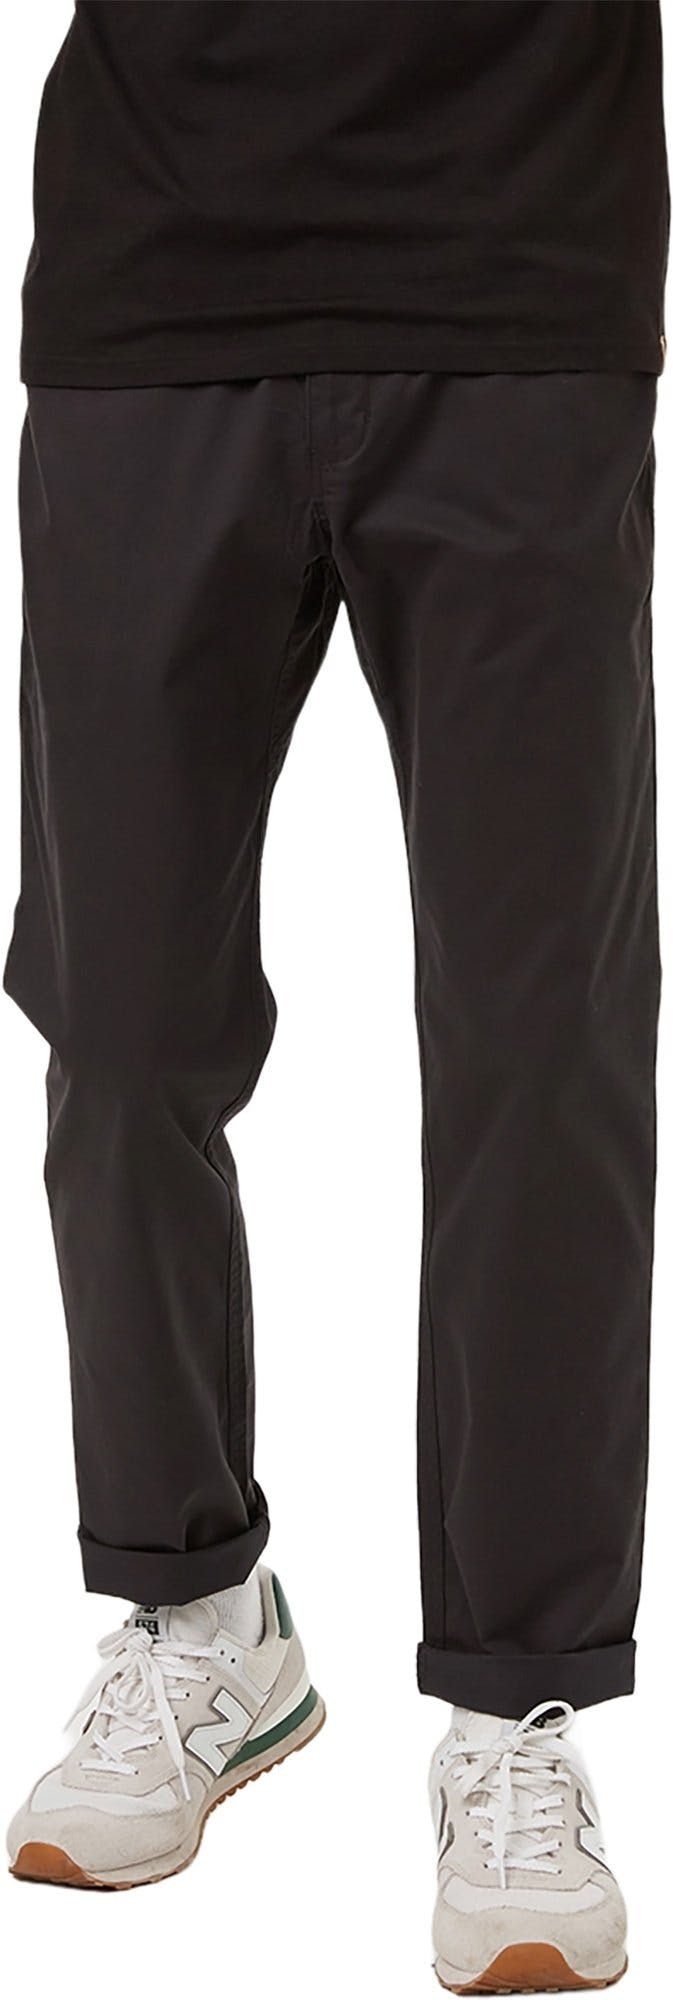 Product image for Everywhere Stretch Twill Pant - Men's